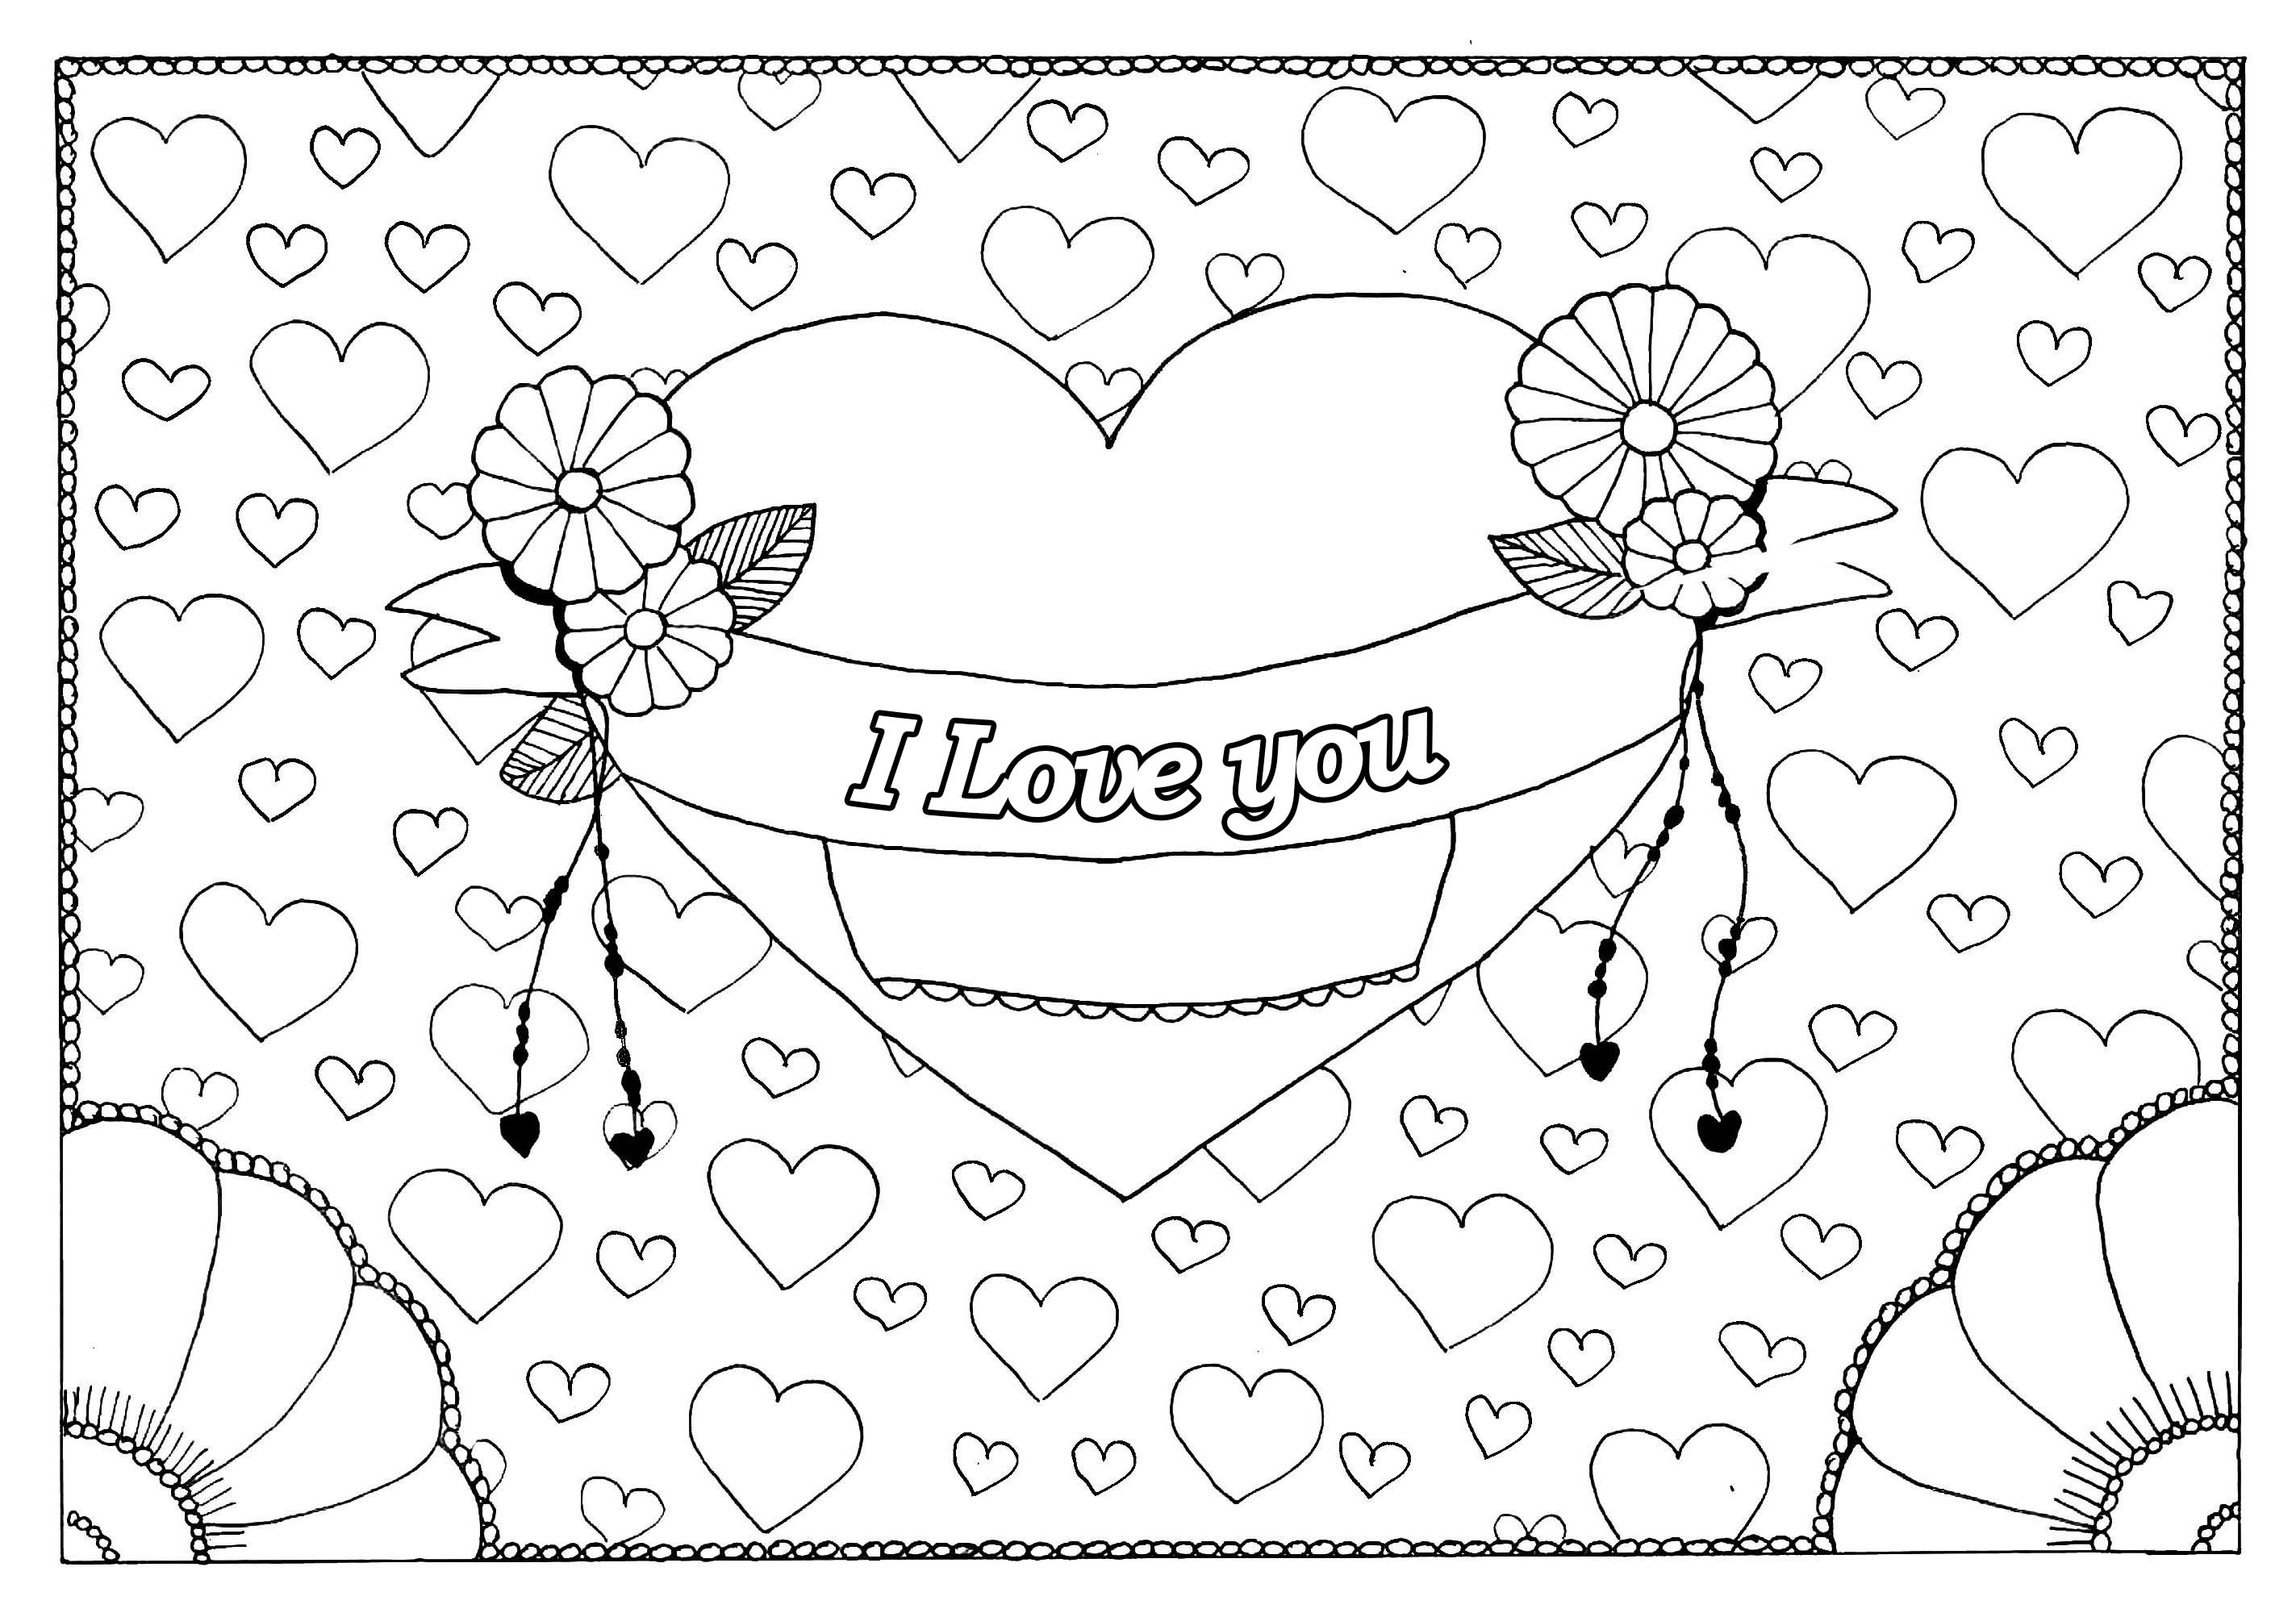 Valentine's Day coloring page - Big heart & little hearts, Artist : Pauline